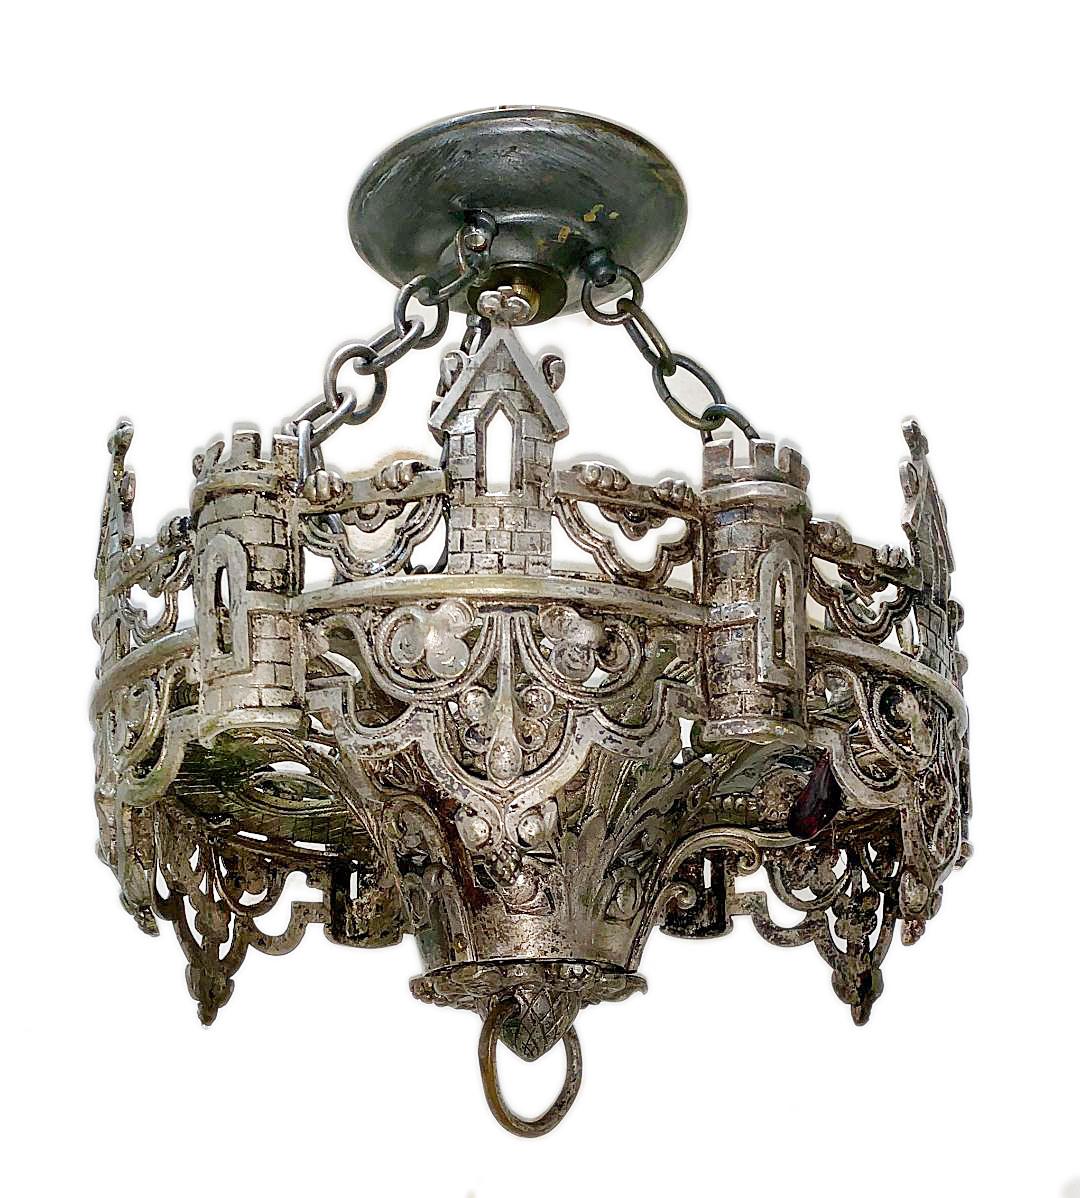 A circa 1920's antique English silver-plated light fixture with three interior lights, open work body and original patina.

Measurements:
Height: 17.5